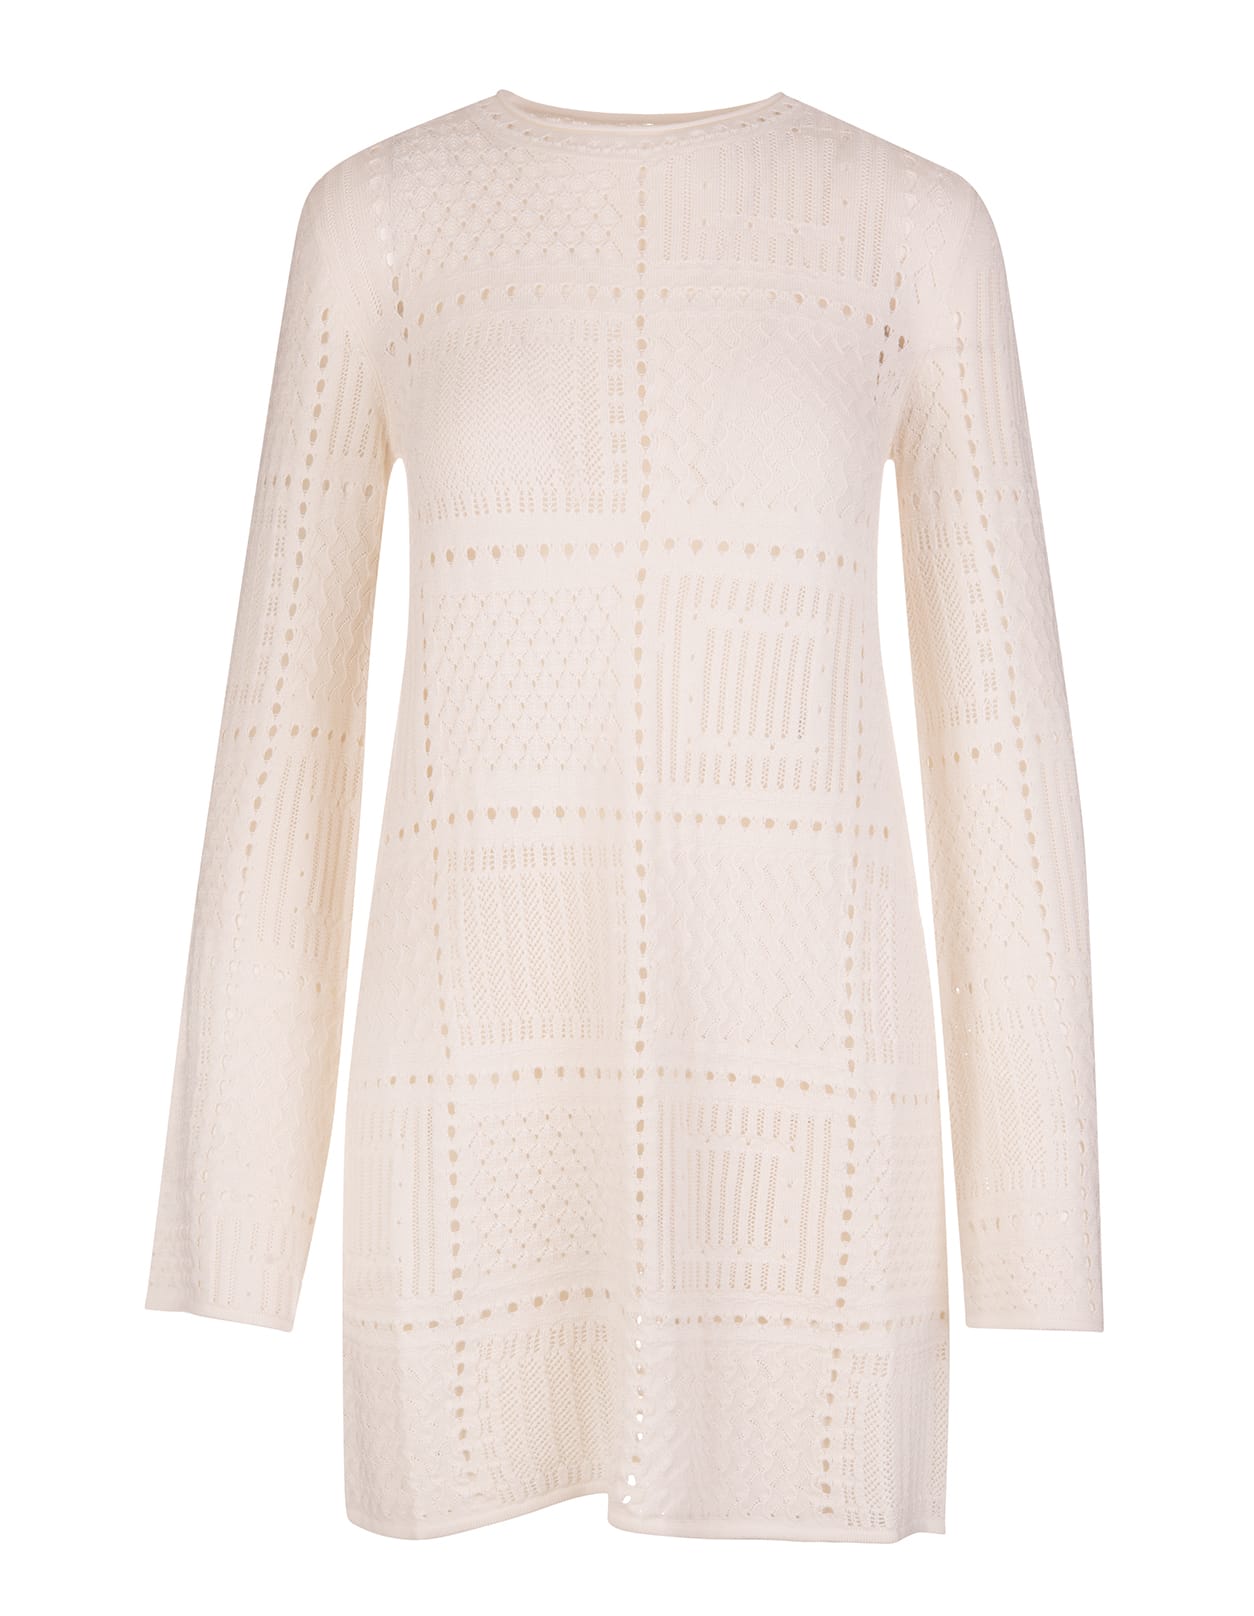 Chloé Short Dress In Cloudy White Silk, Wool And Cashmere With Embroidery